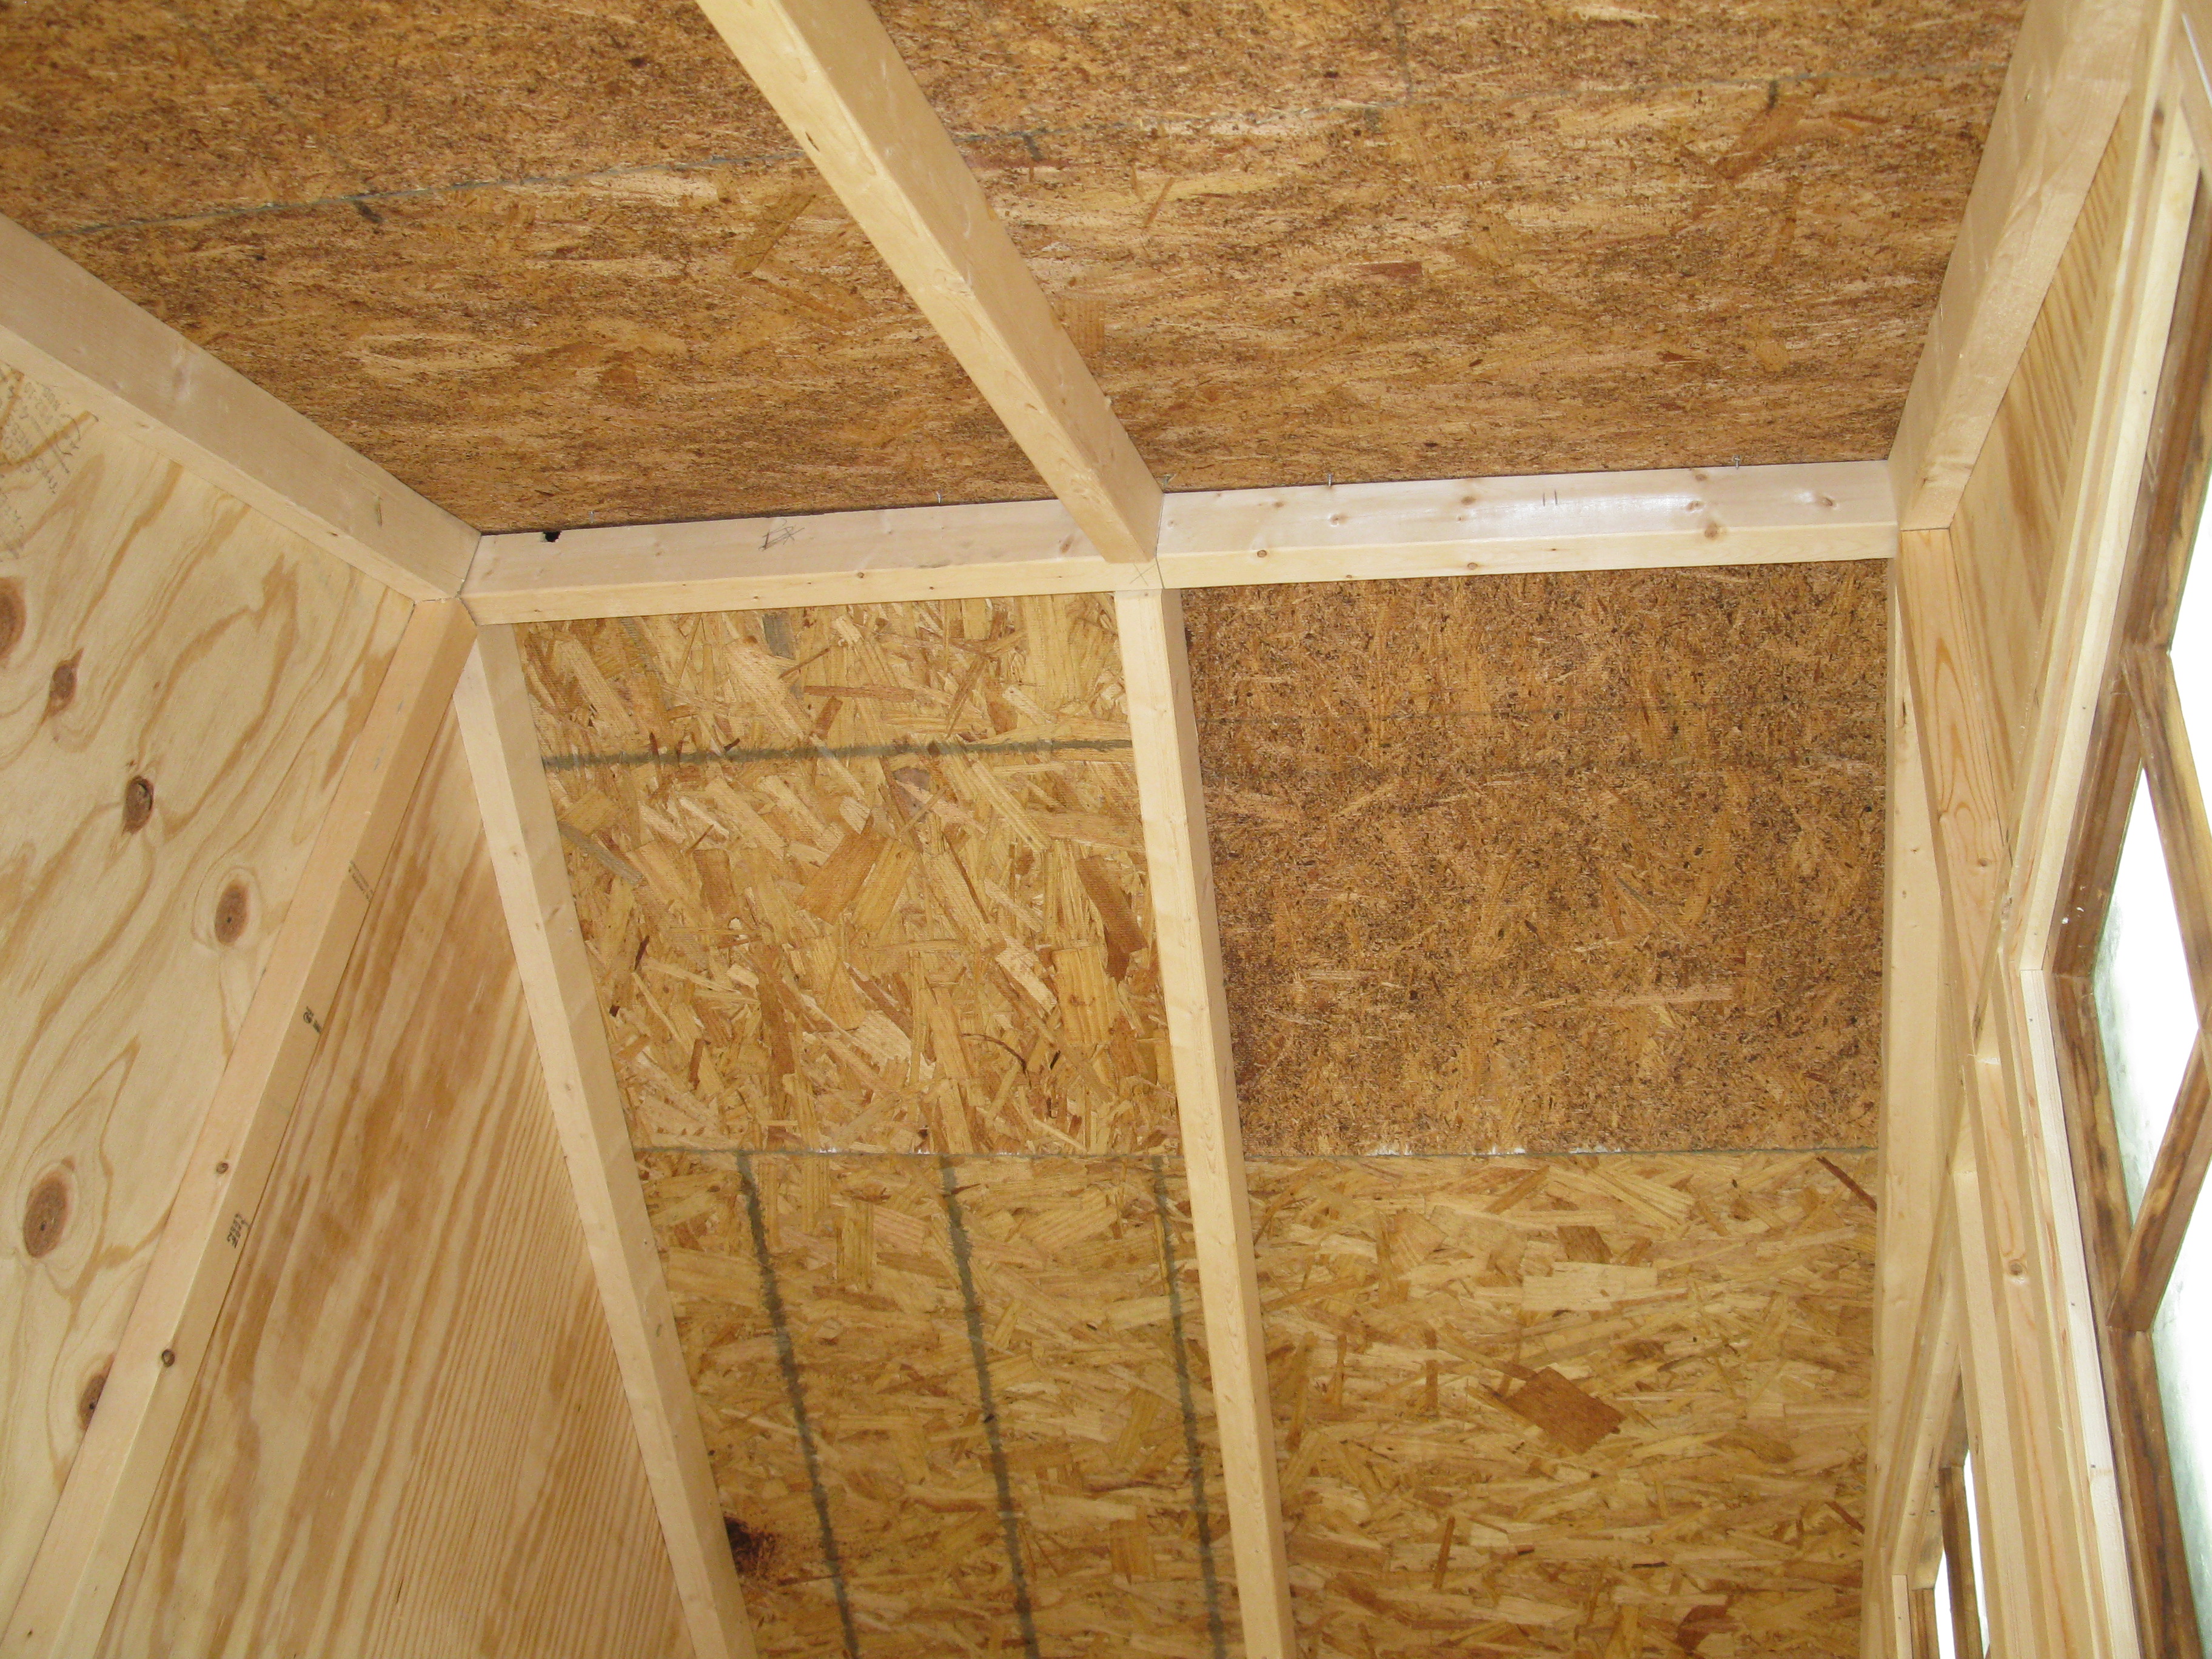 Used 2x3s for rafters(ripped 2x6s in half).